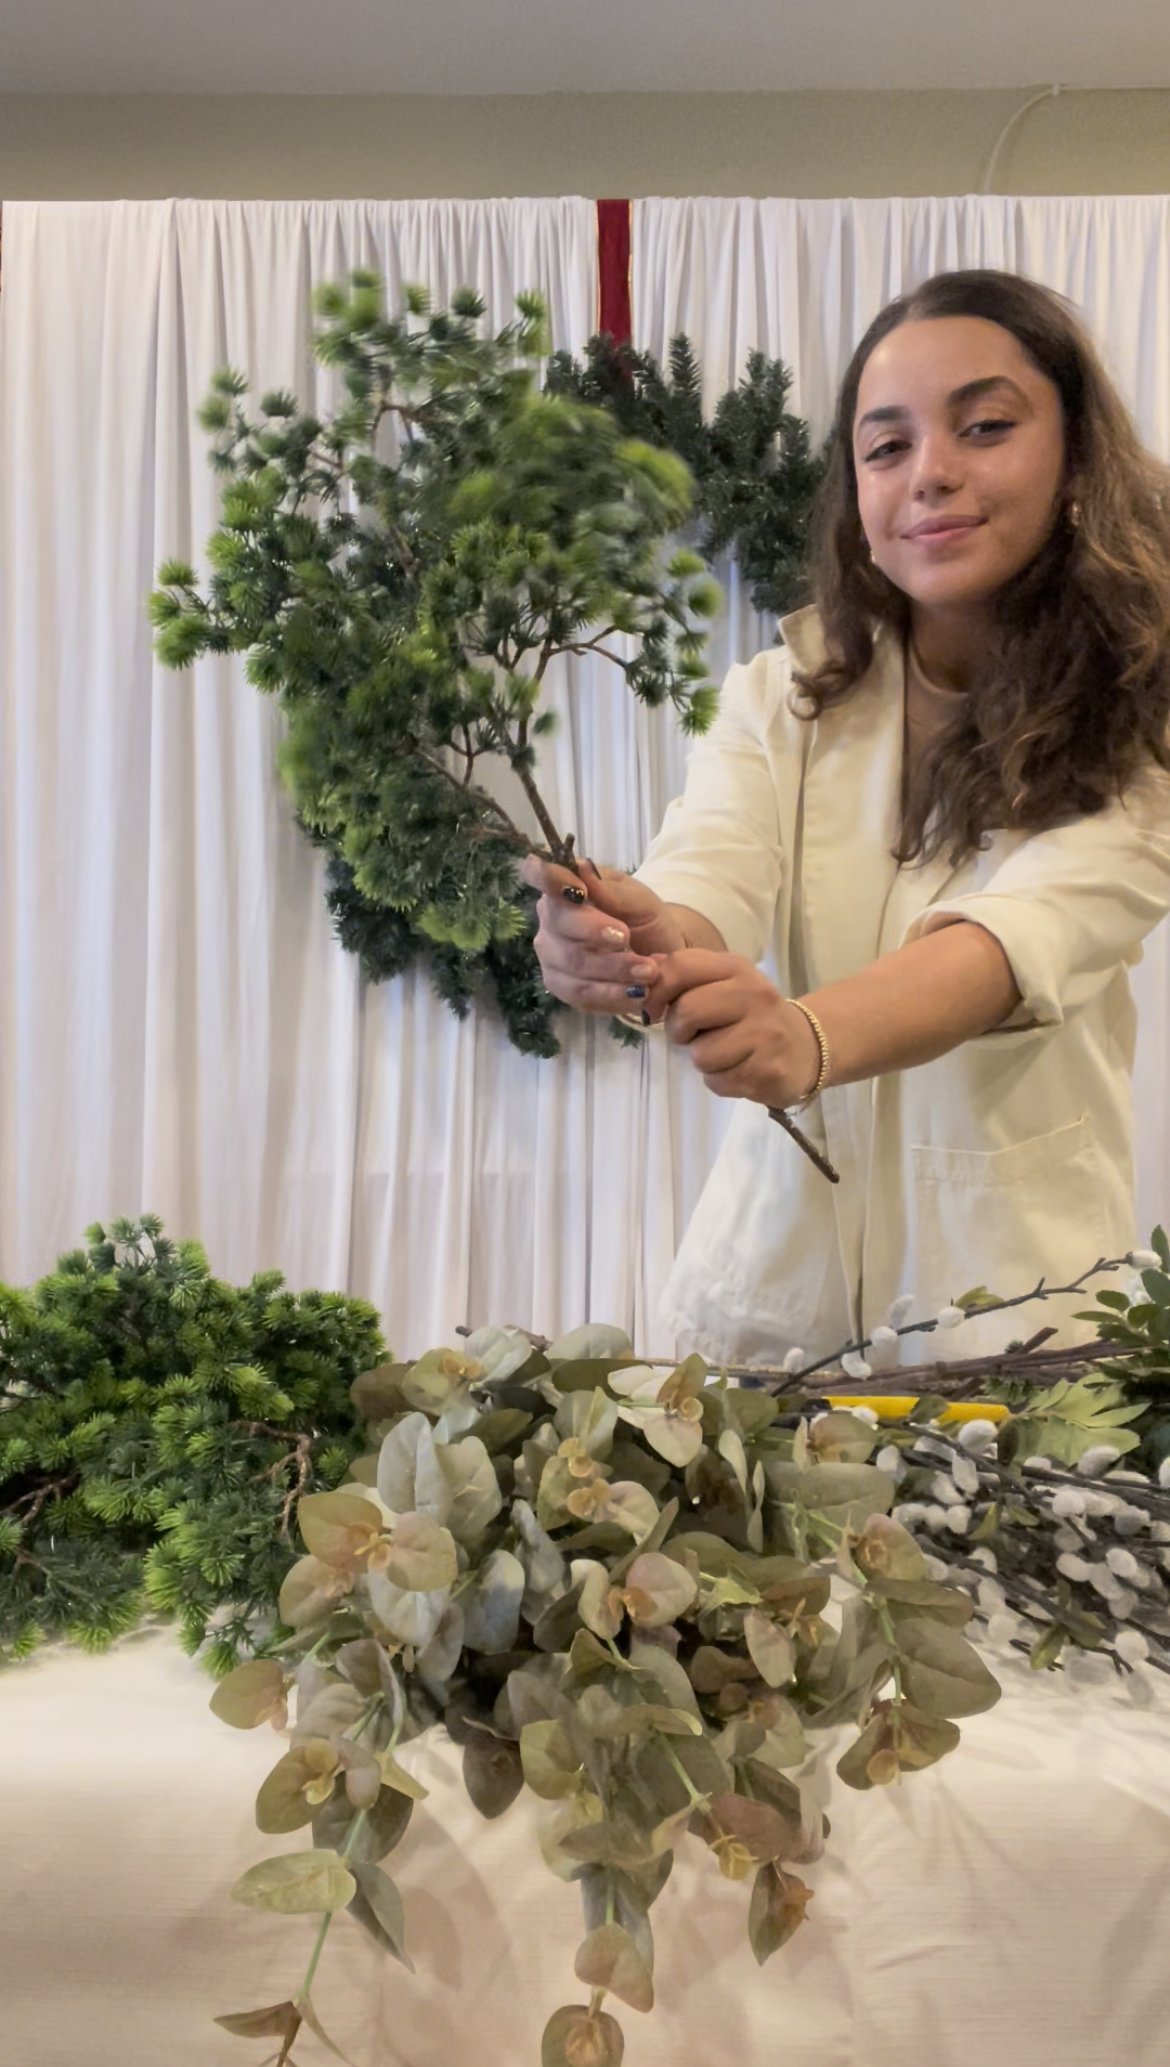 Alexis Shows Us How to Make Dreamy Transitional and Whimsical Christmas Wreaths